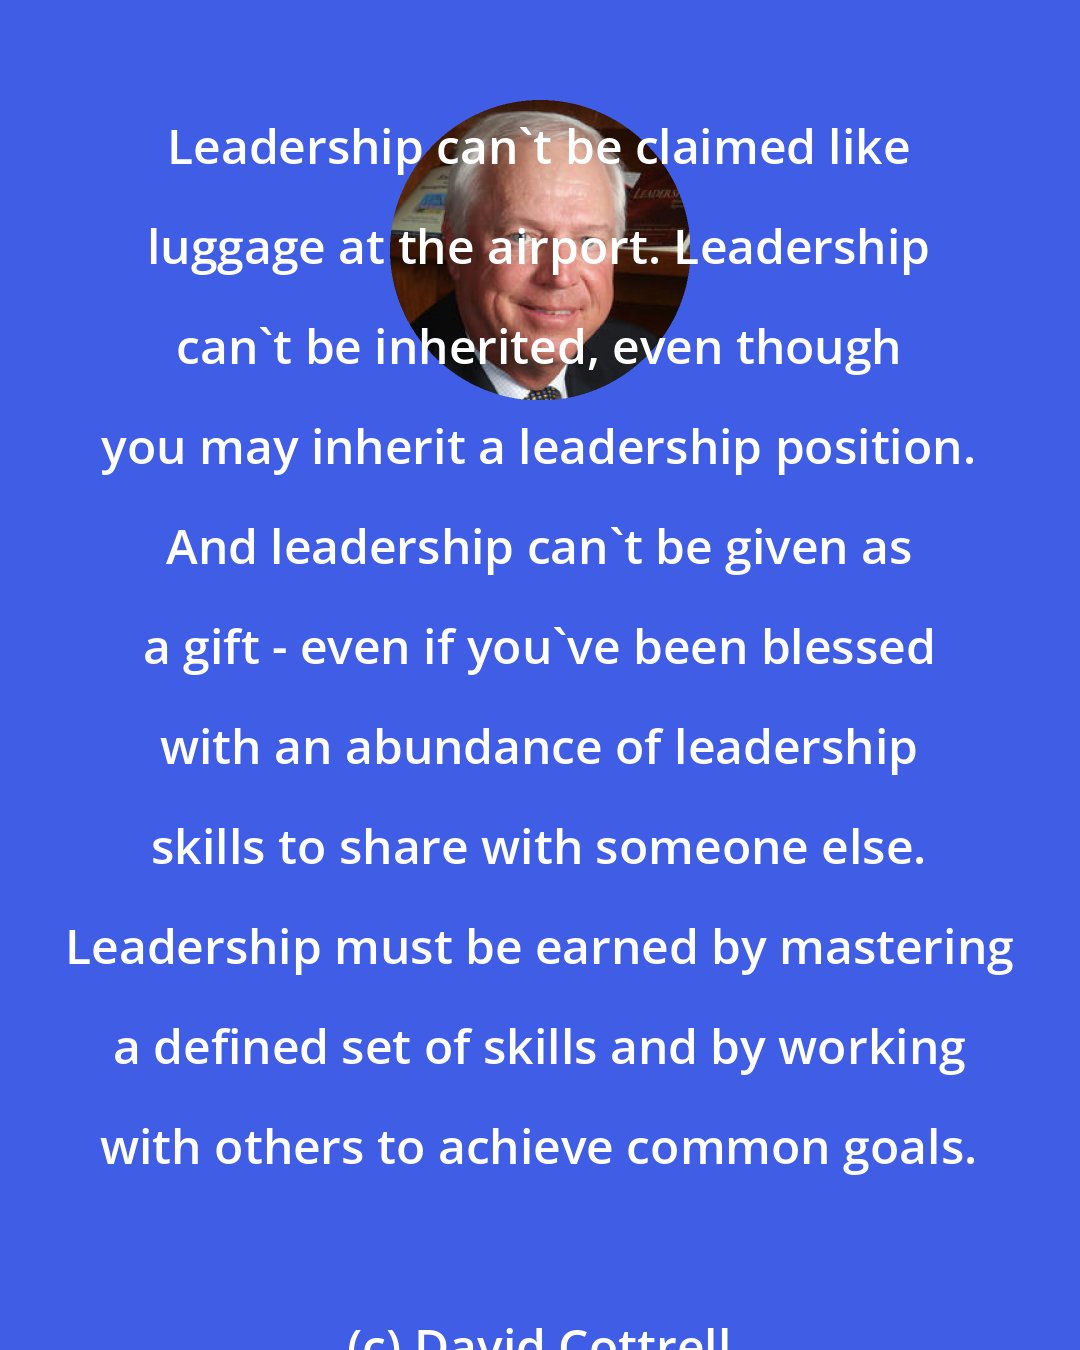 David Cottrell: Leadership can't be claimed like luggage at the airport. Leadership can't be inherited, even though you may inherit a leadership position. And leadership can't be given as a gift - even if you've been blessed with an abundance of leadership skills to share with someone else. Leadership must be earned by mastering a defined set of skills and by working with others to achieve common goals.